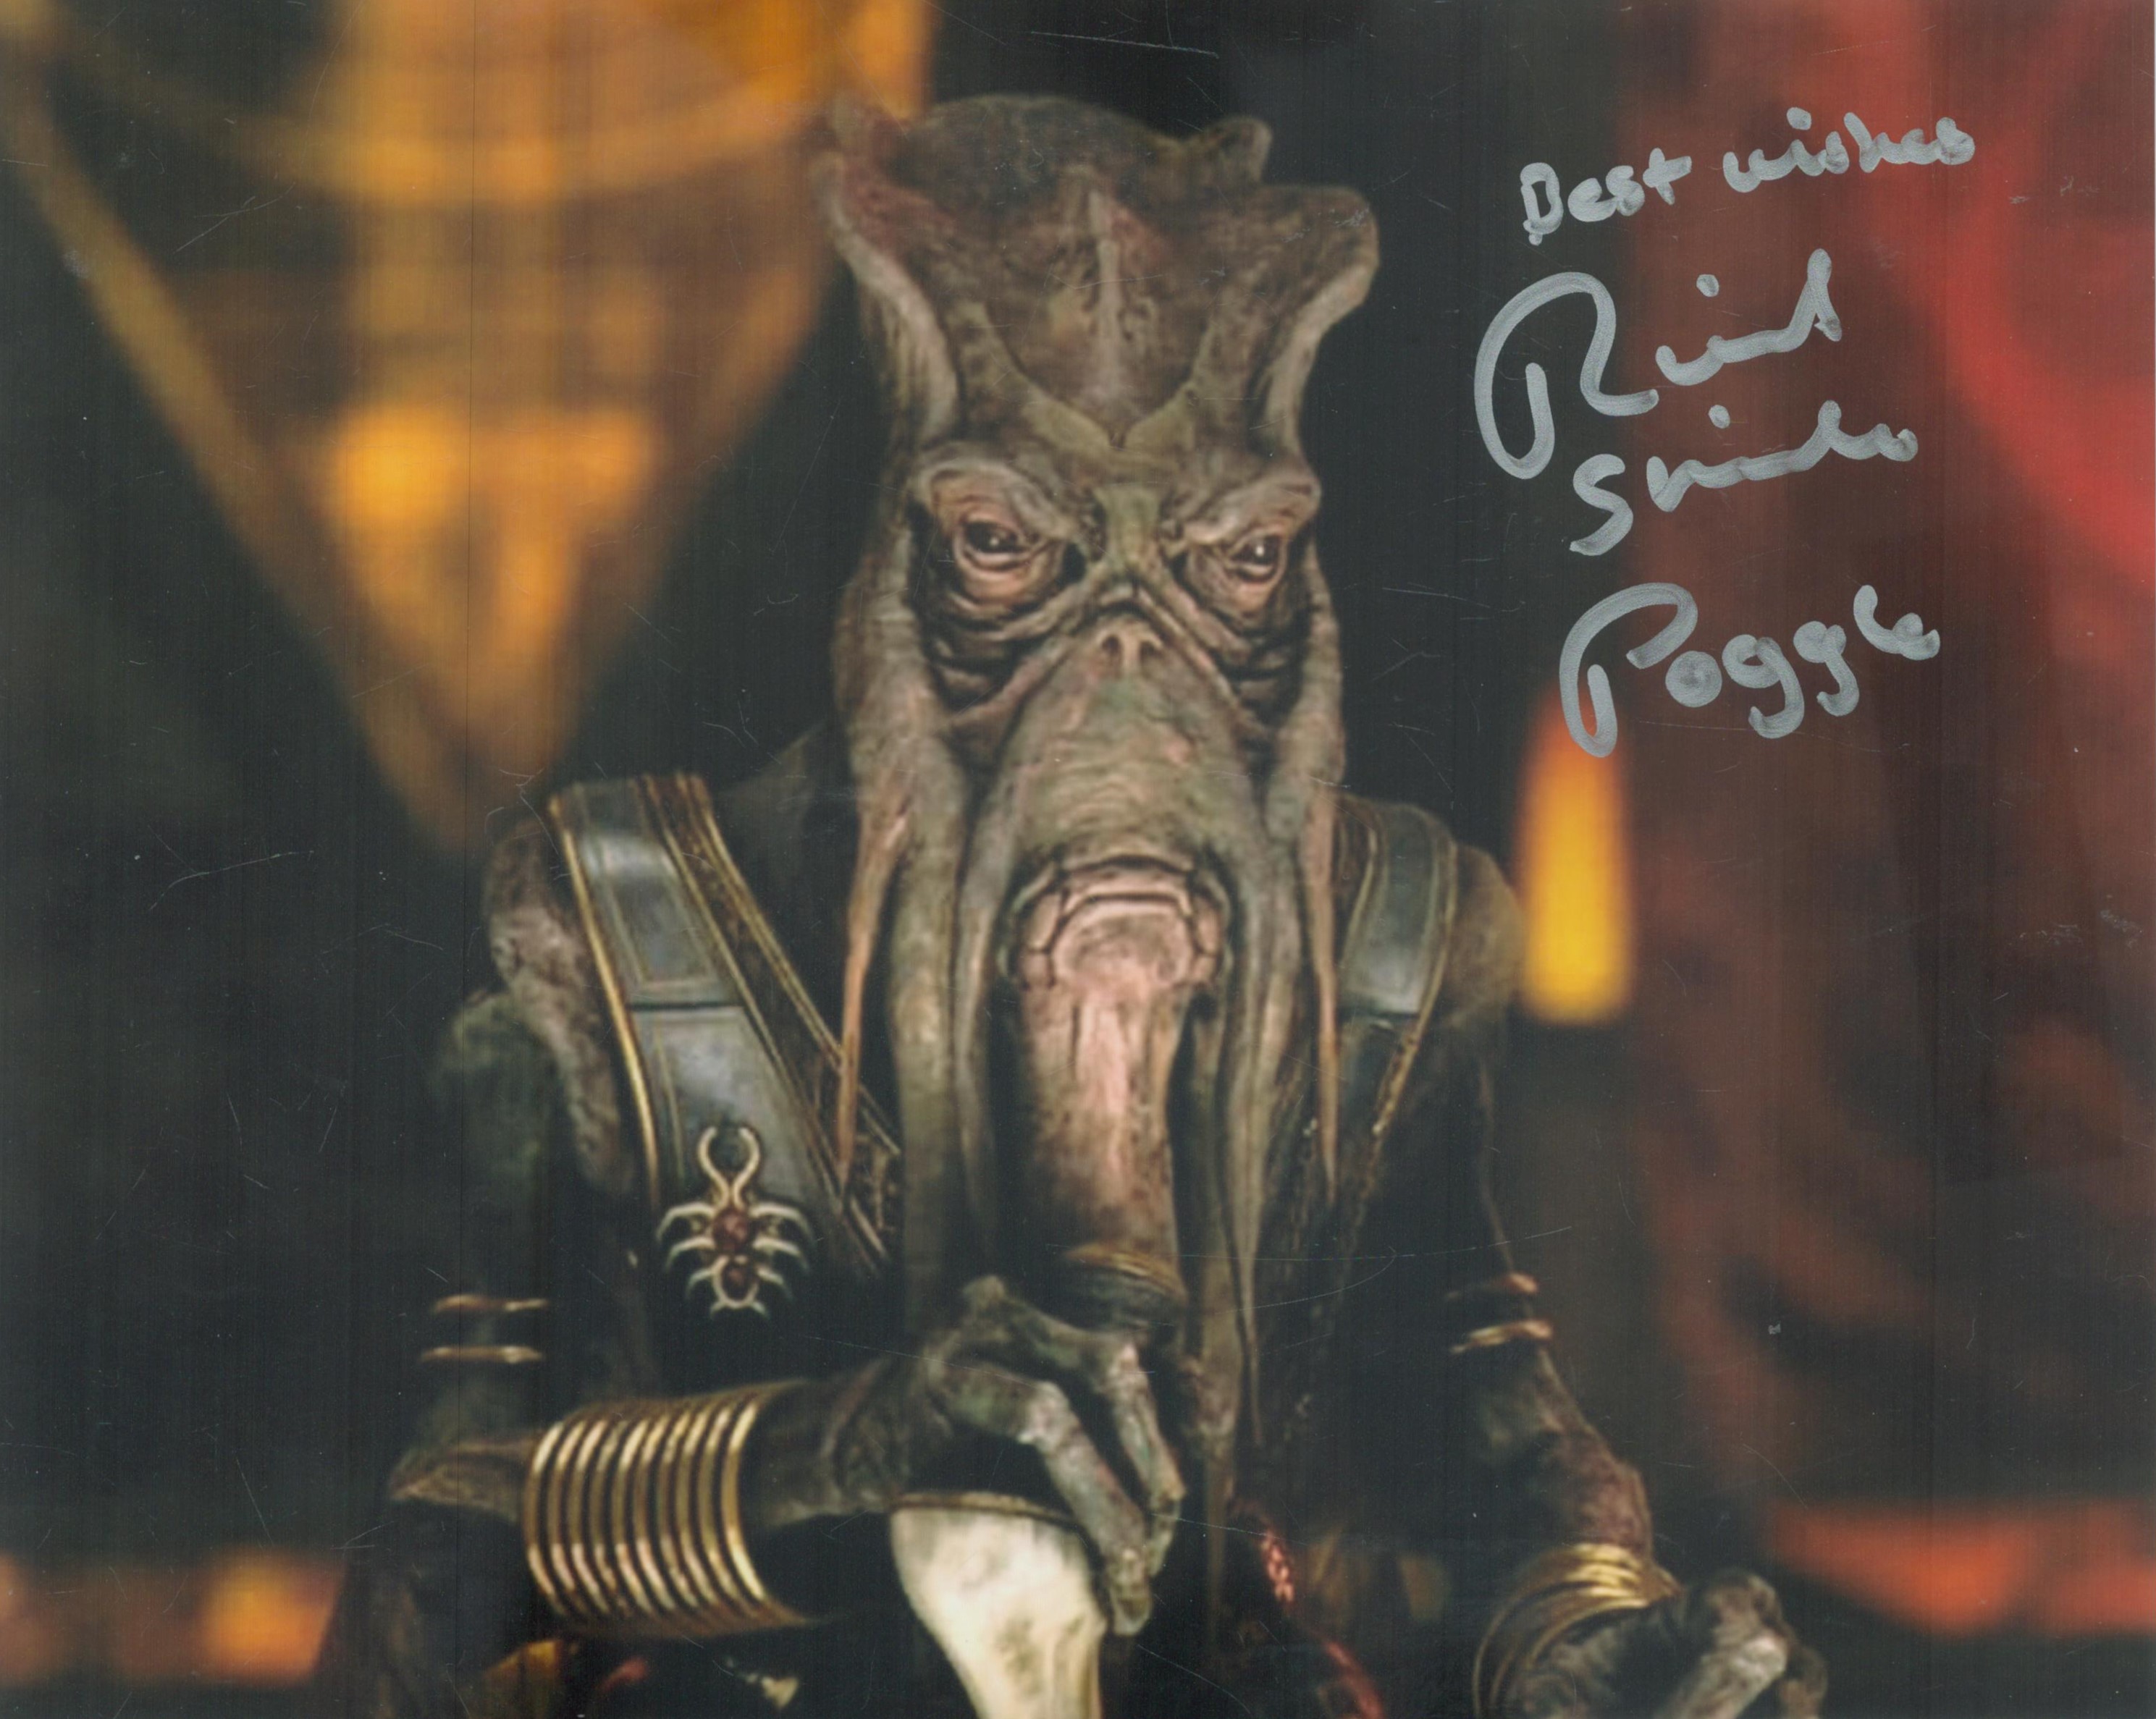 Star Wars collection three Richard Stride signed movie scene 8 x 10 inch colour photos as Poggle, - Image 2 of 2